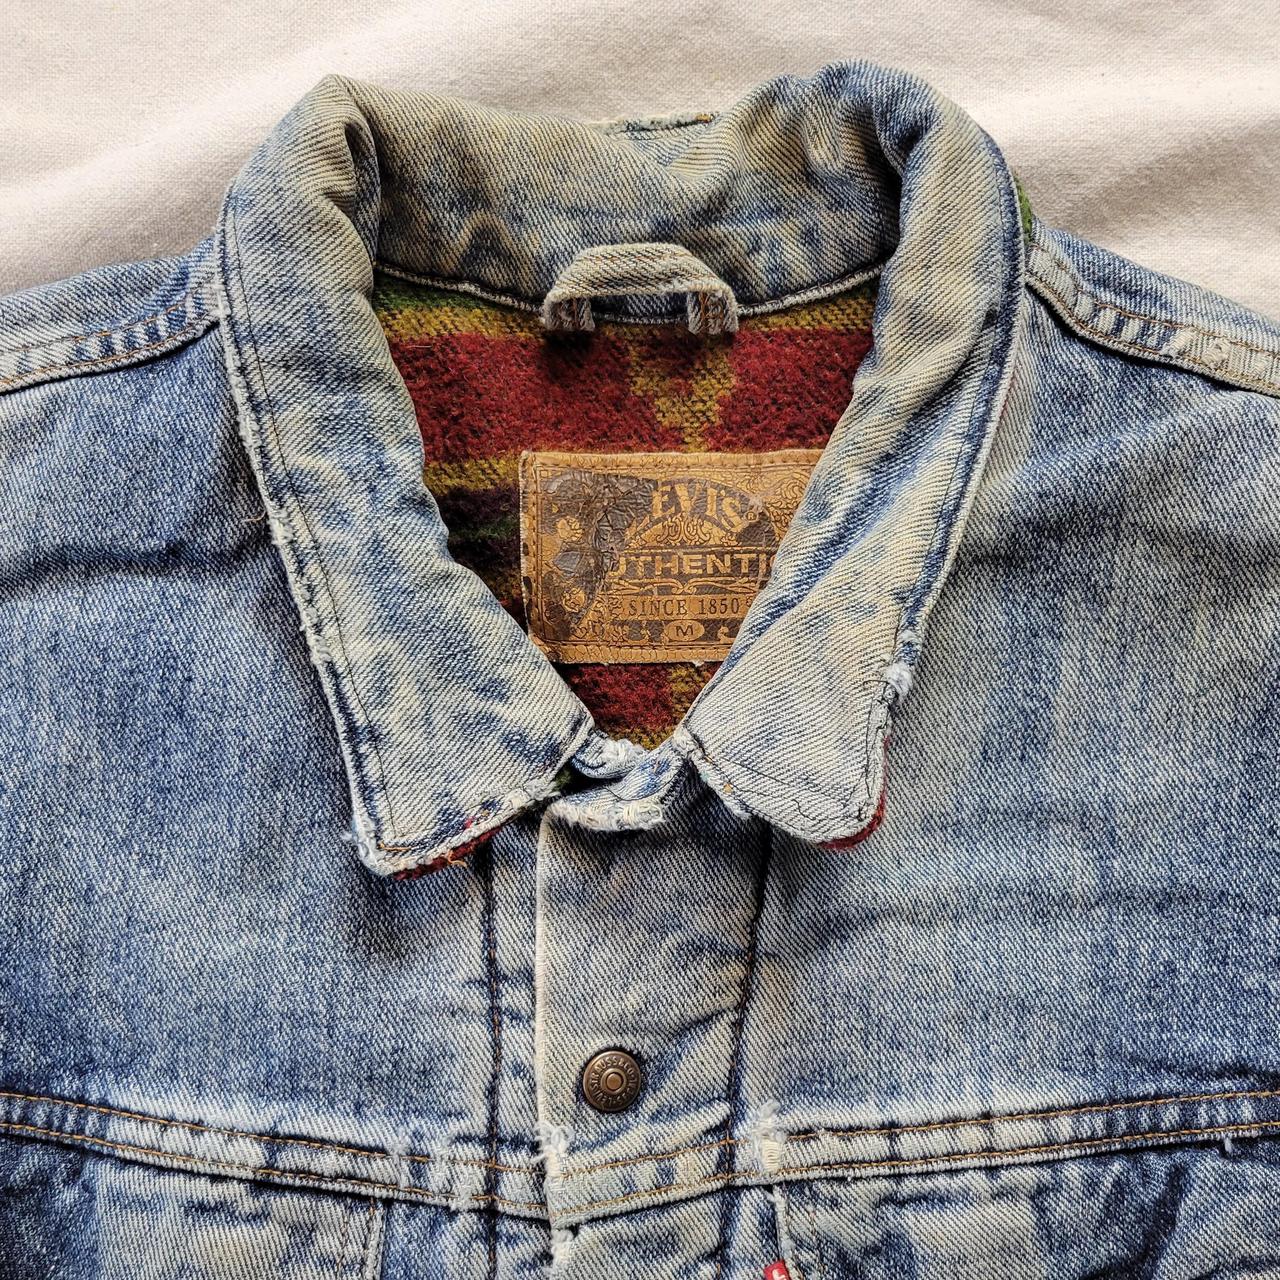 Vintage 80s Levi's made in USA trucker jacket with... - Depop